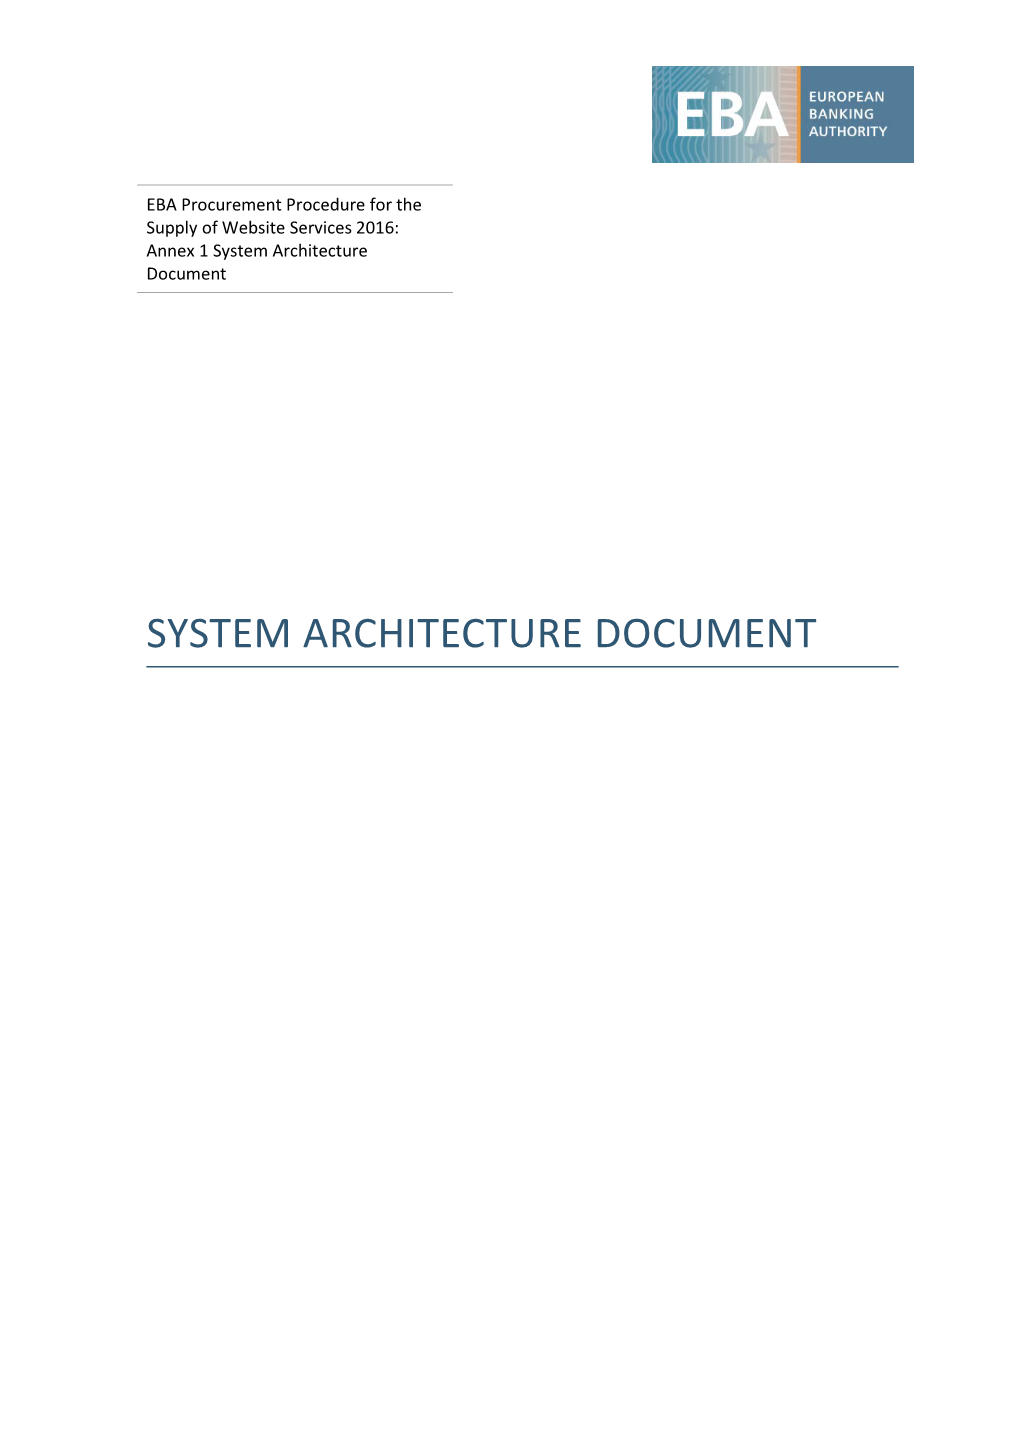 System Architecture Document